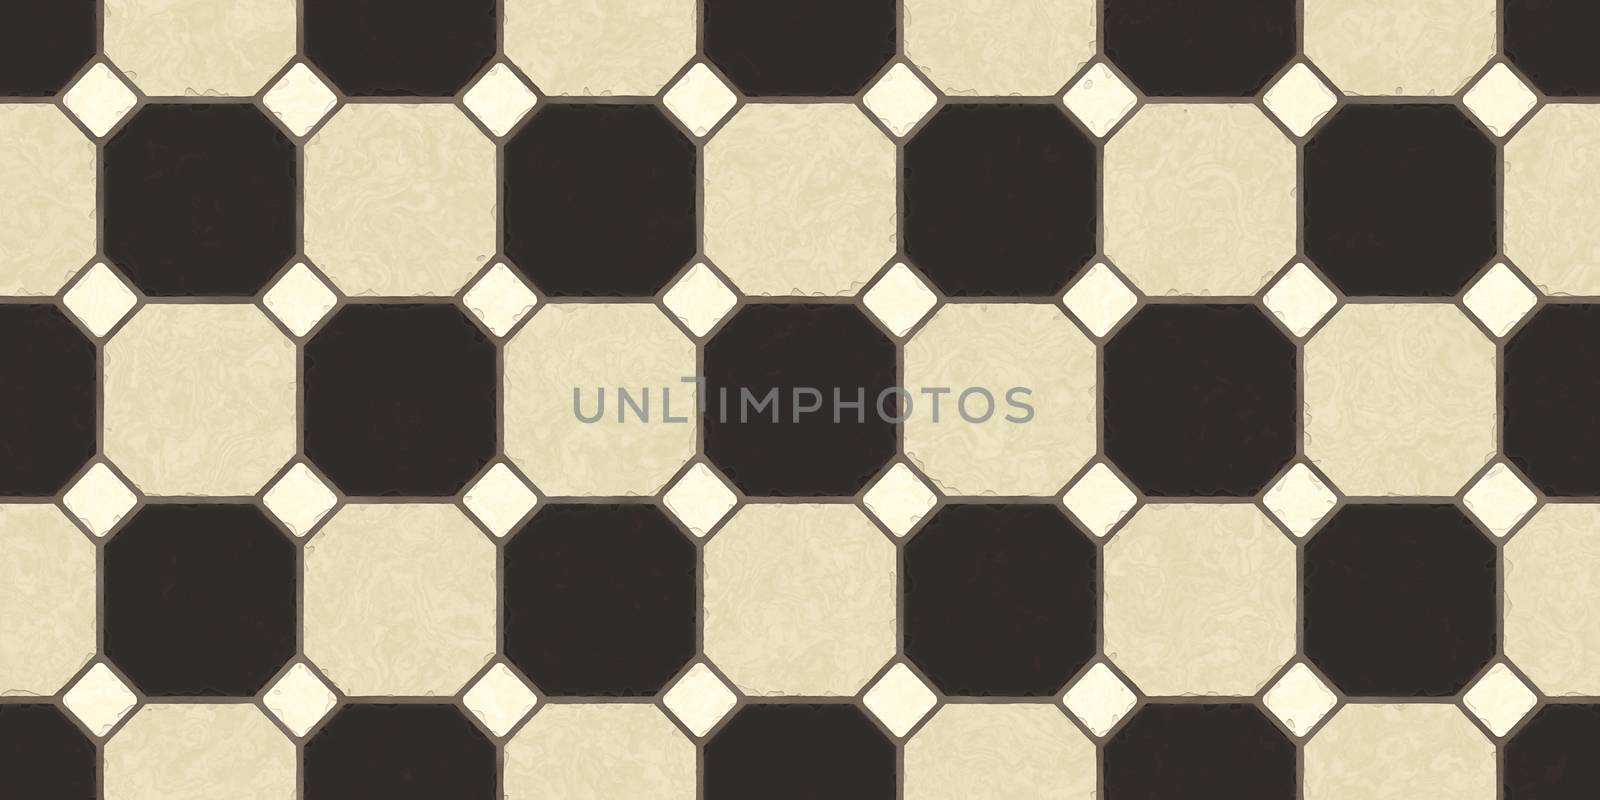 Strong Brown Beige Seamless Classic Floor Tile Texture. Simple Kitchen, Toilet or Bathroom Mosaic Tiles Background. 3D rendering. 3D illustration.